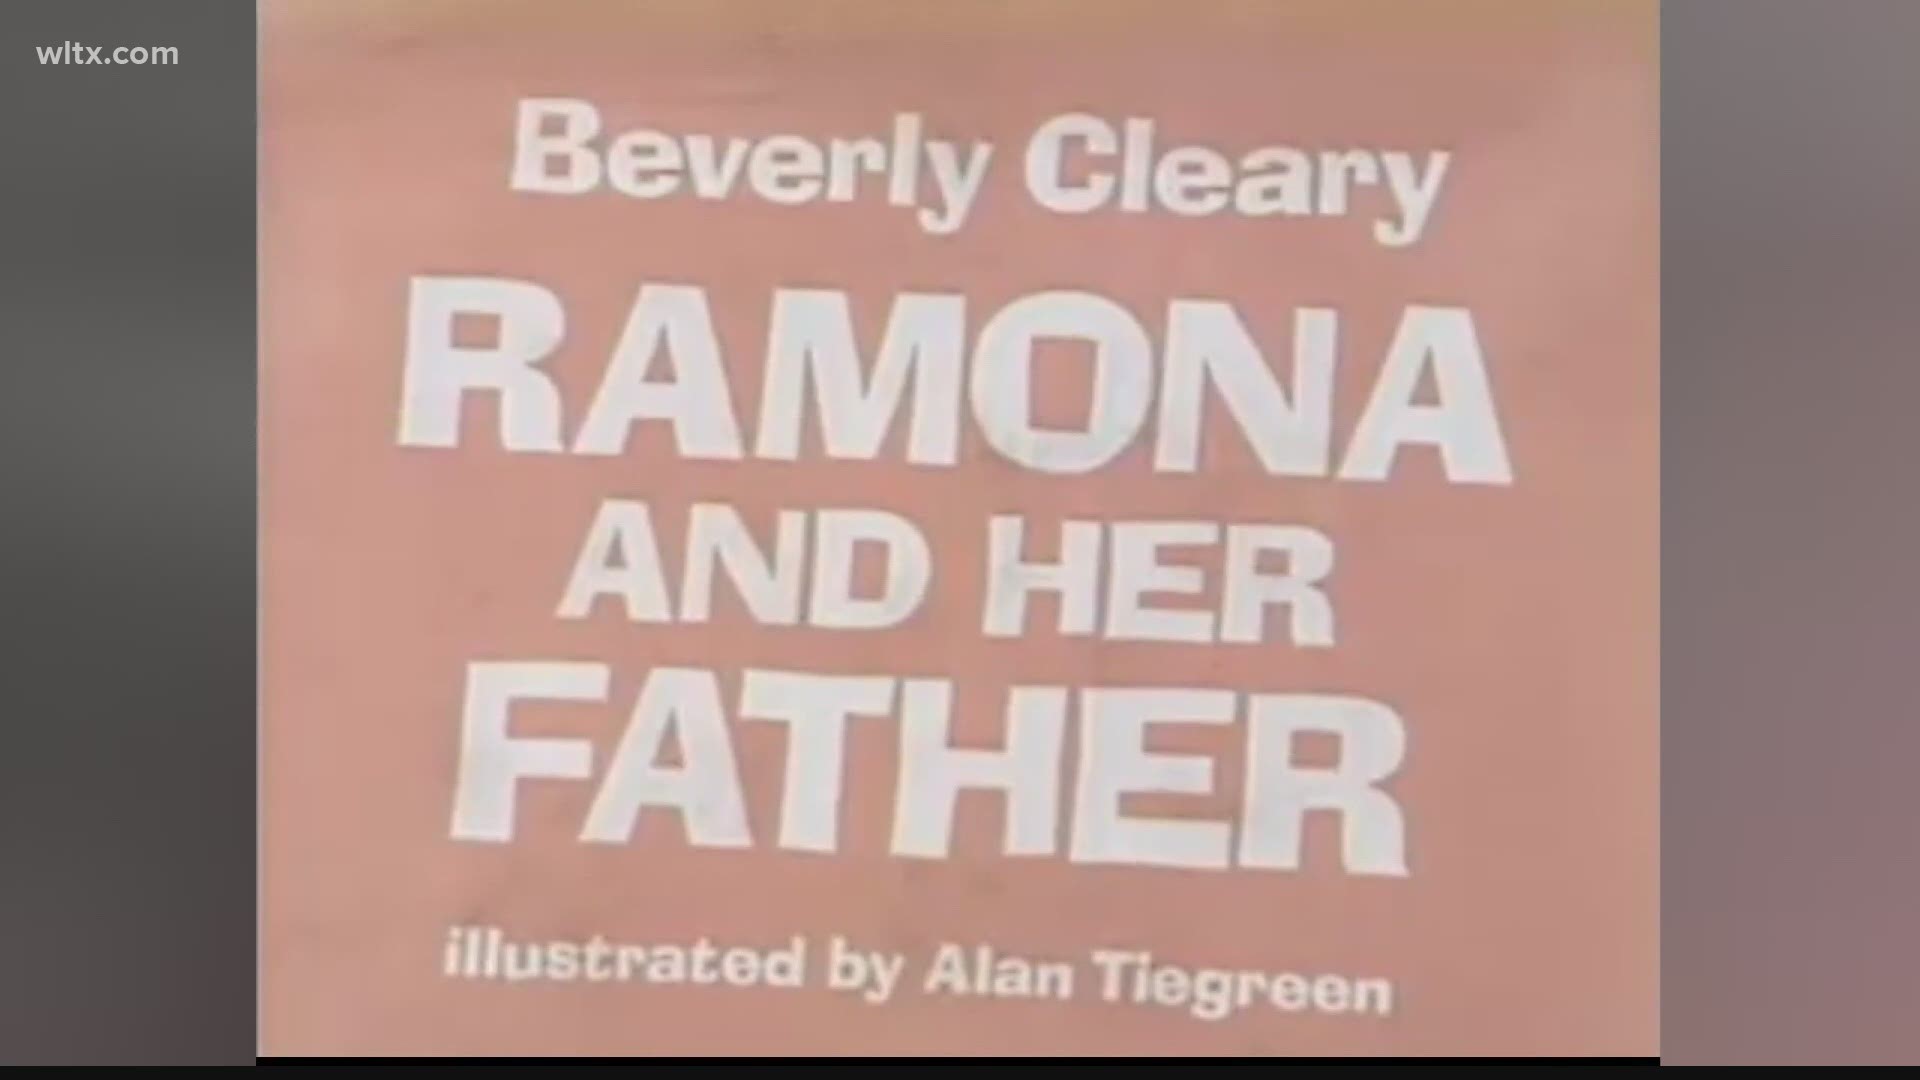 Throughout her decades-long career, Cleary introduced the world to popular characters like Ramona and Beezus Quimby, Henry Huggins and Ralph S. Mouse.